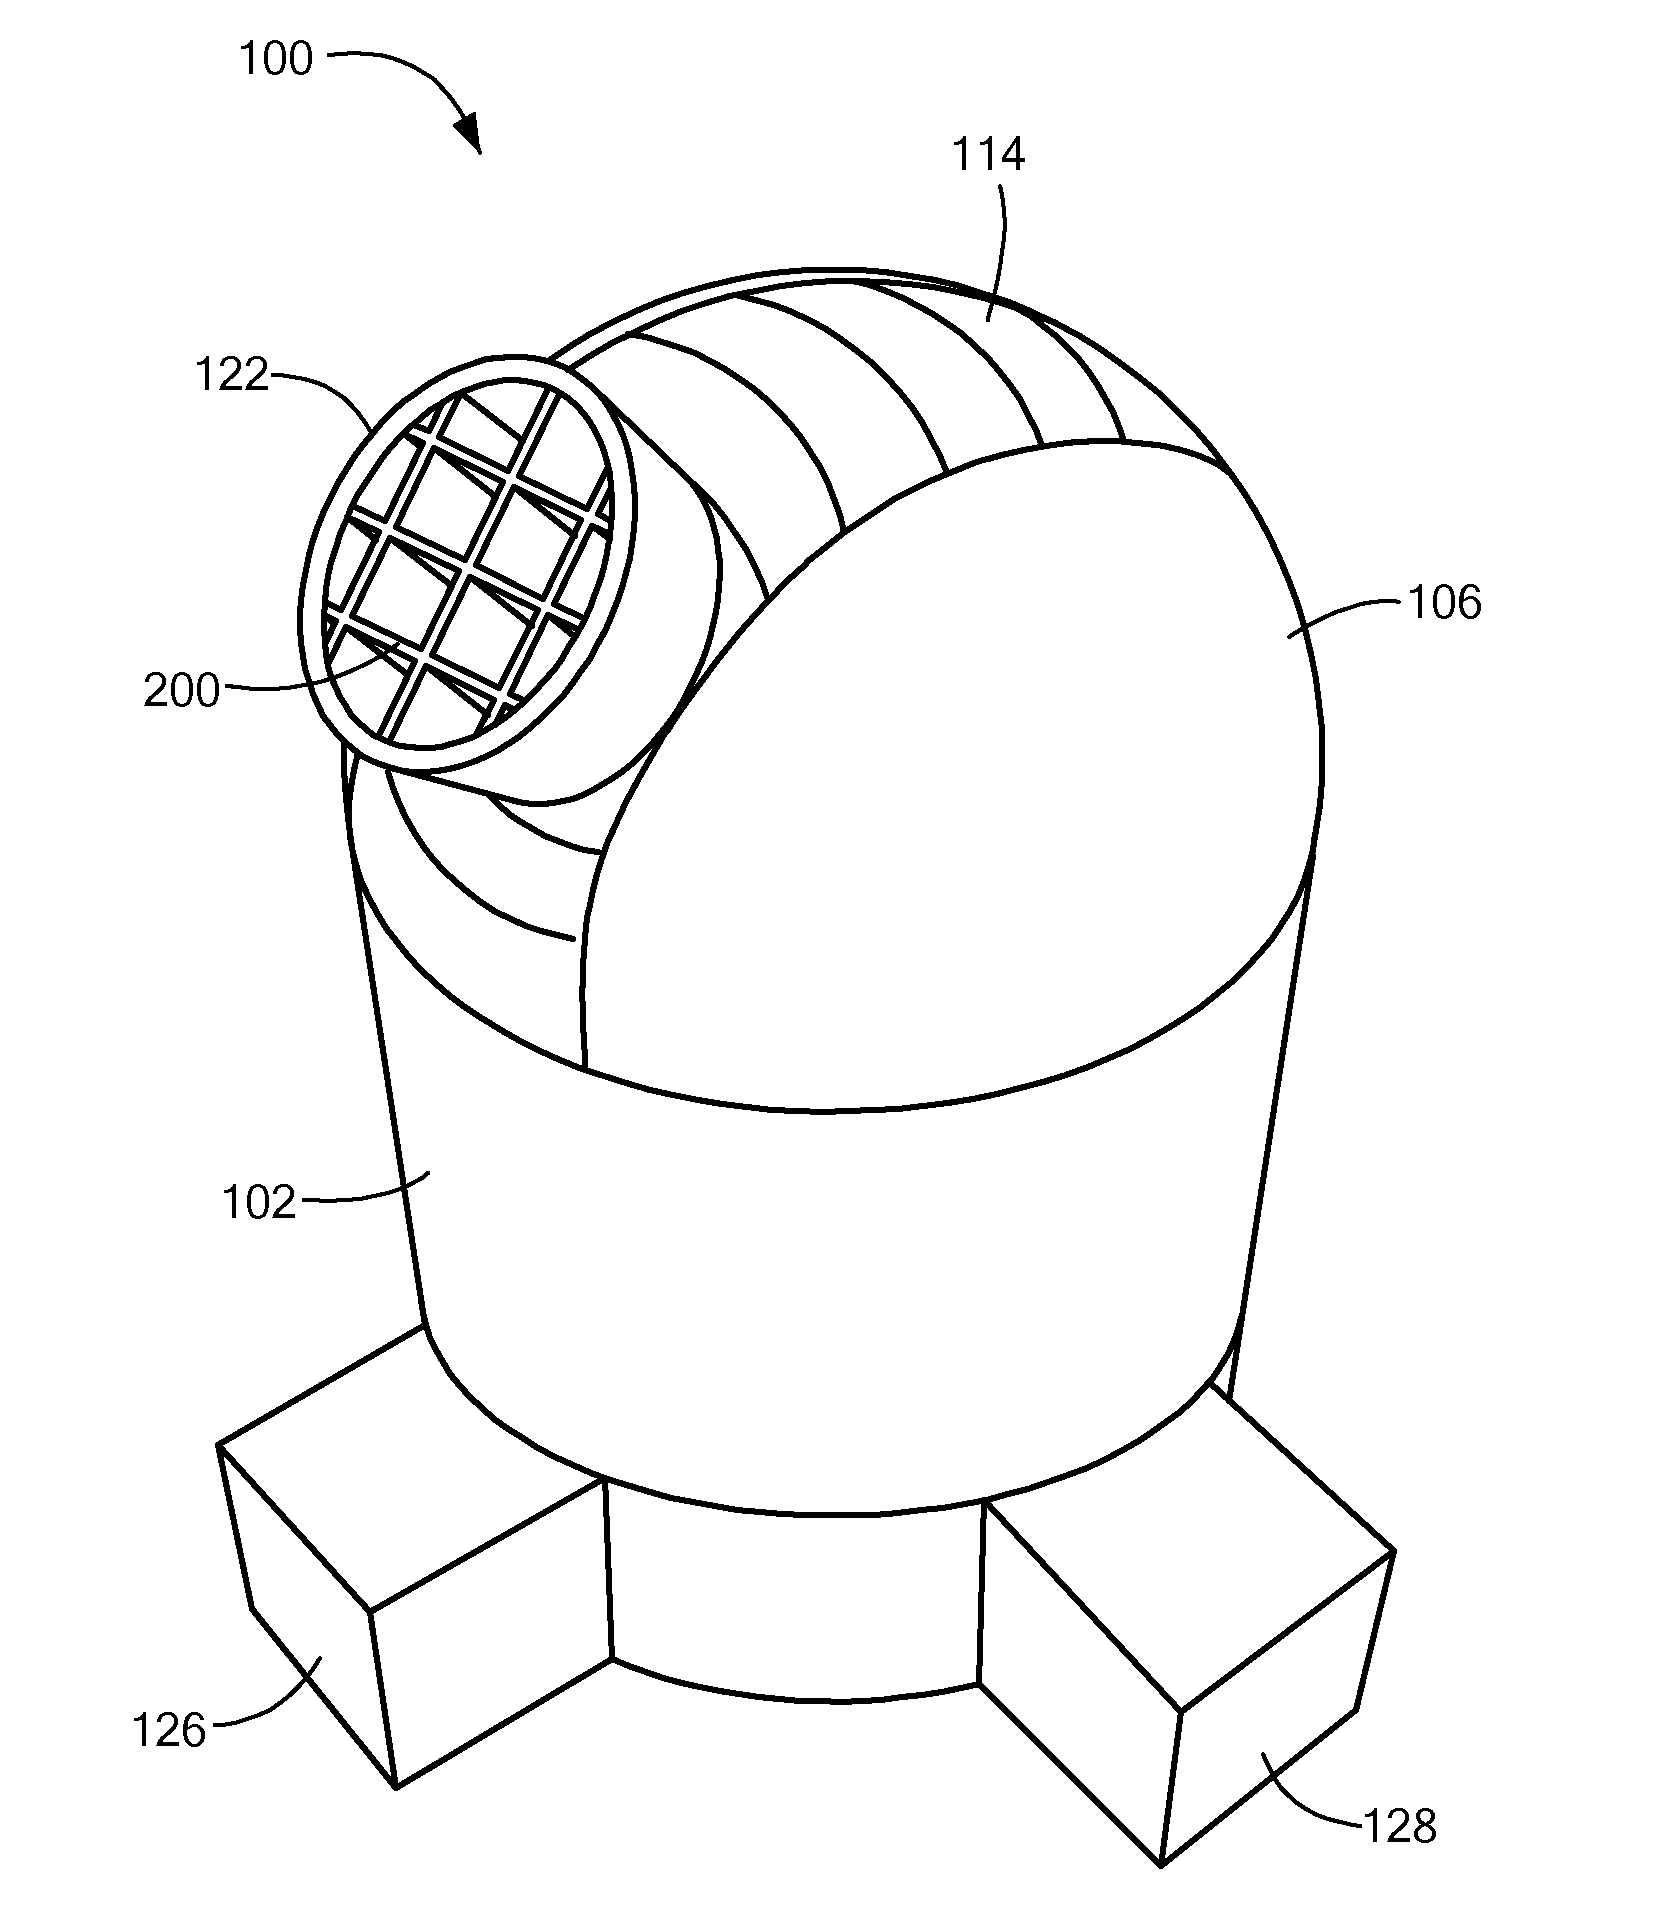 Navigation System with Monocentric Lens and Curved Focal Plane Sensor